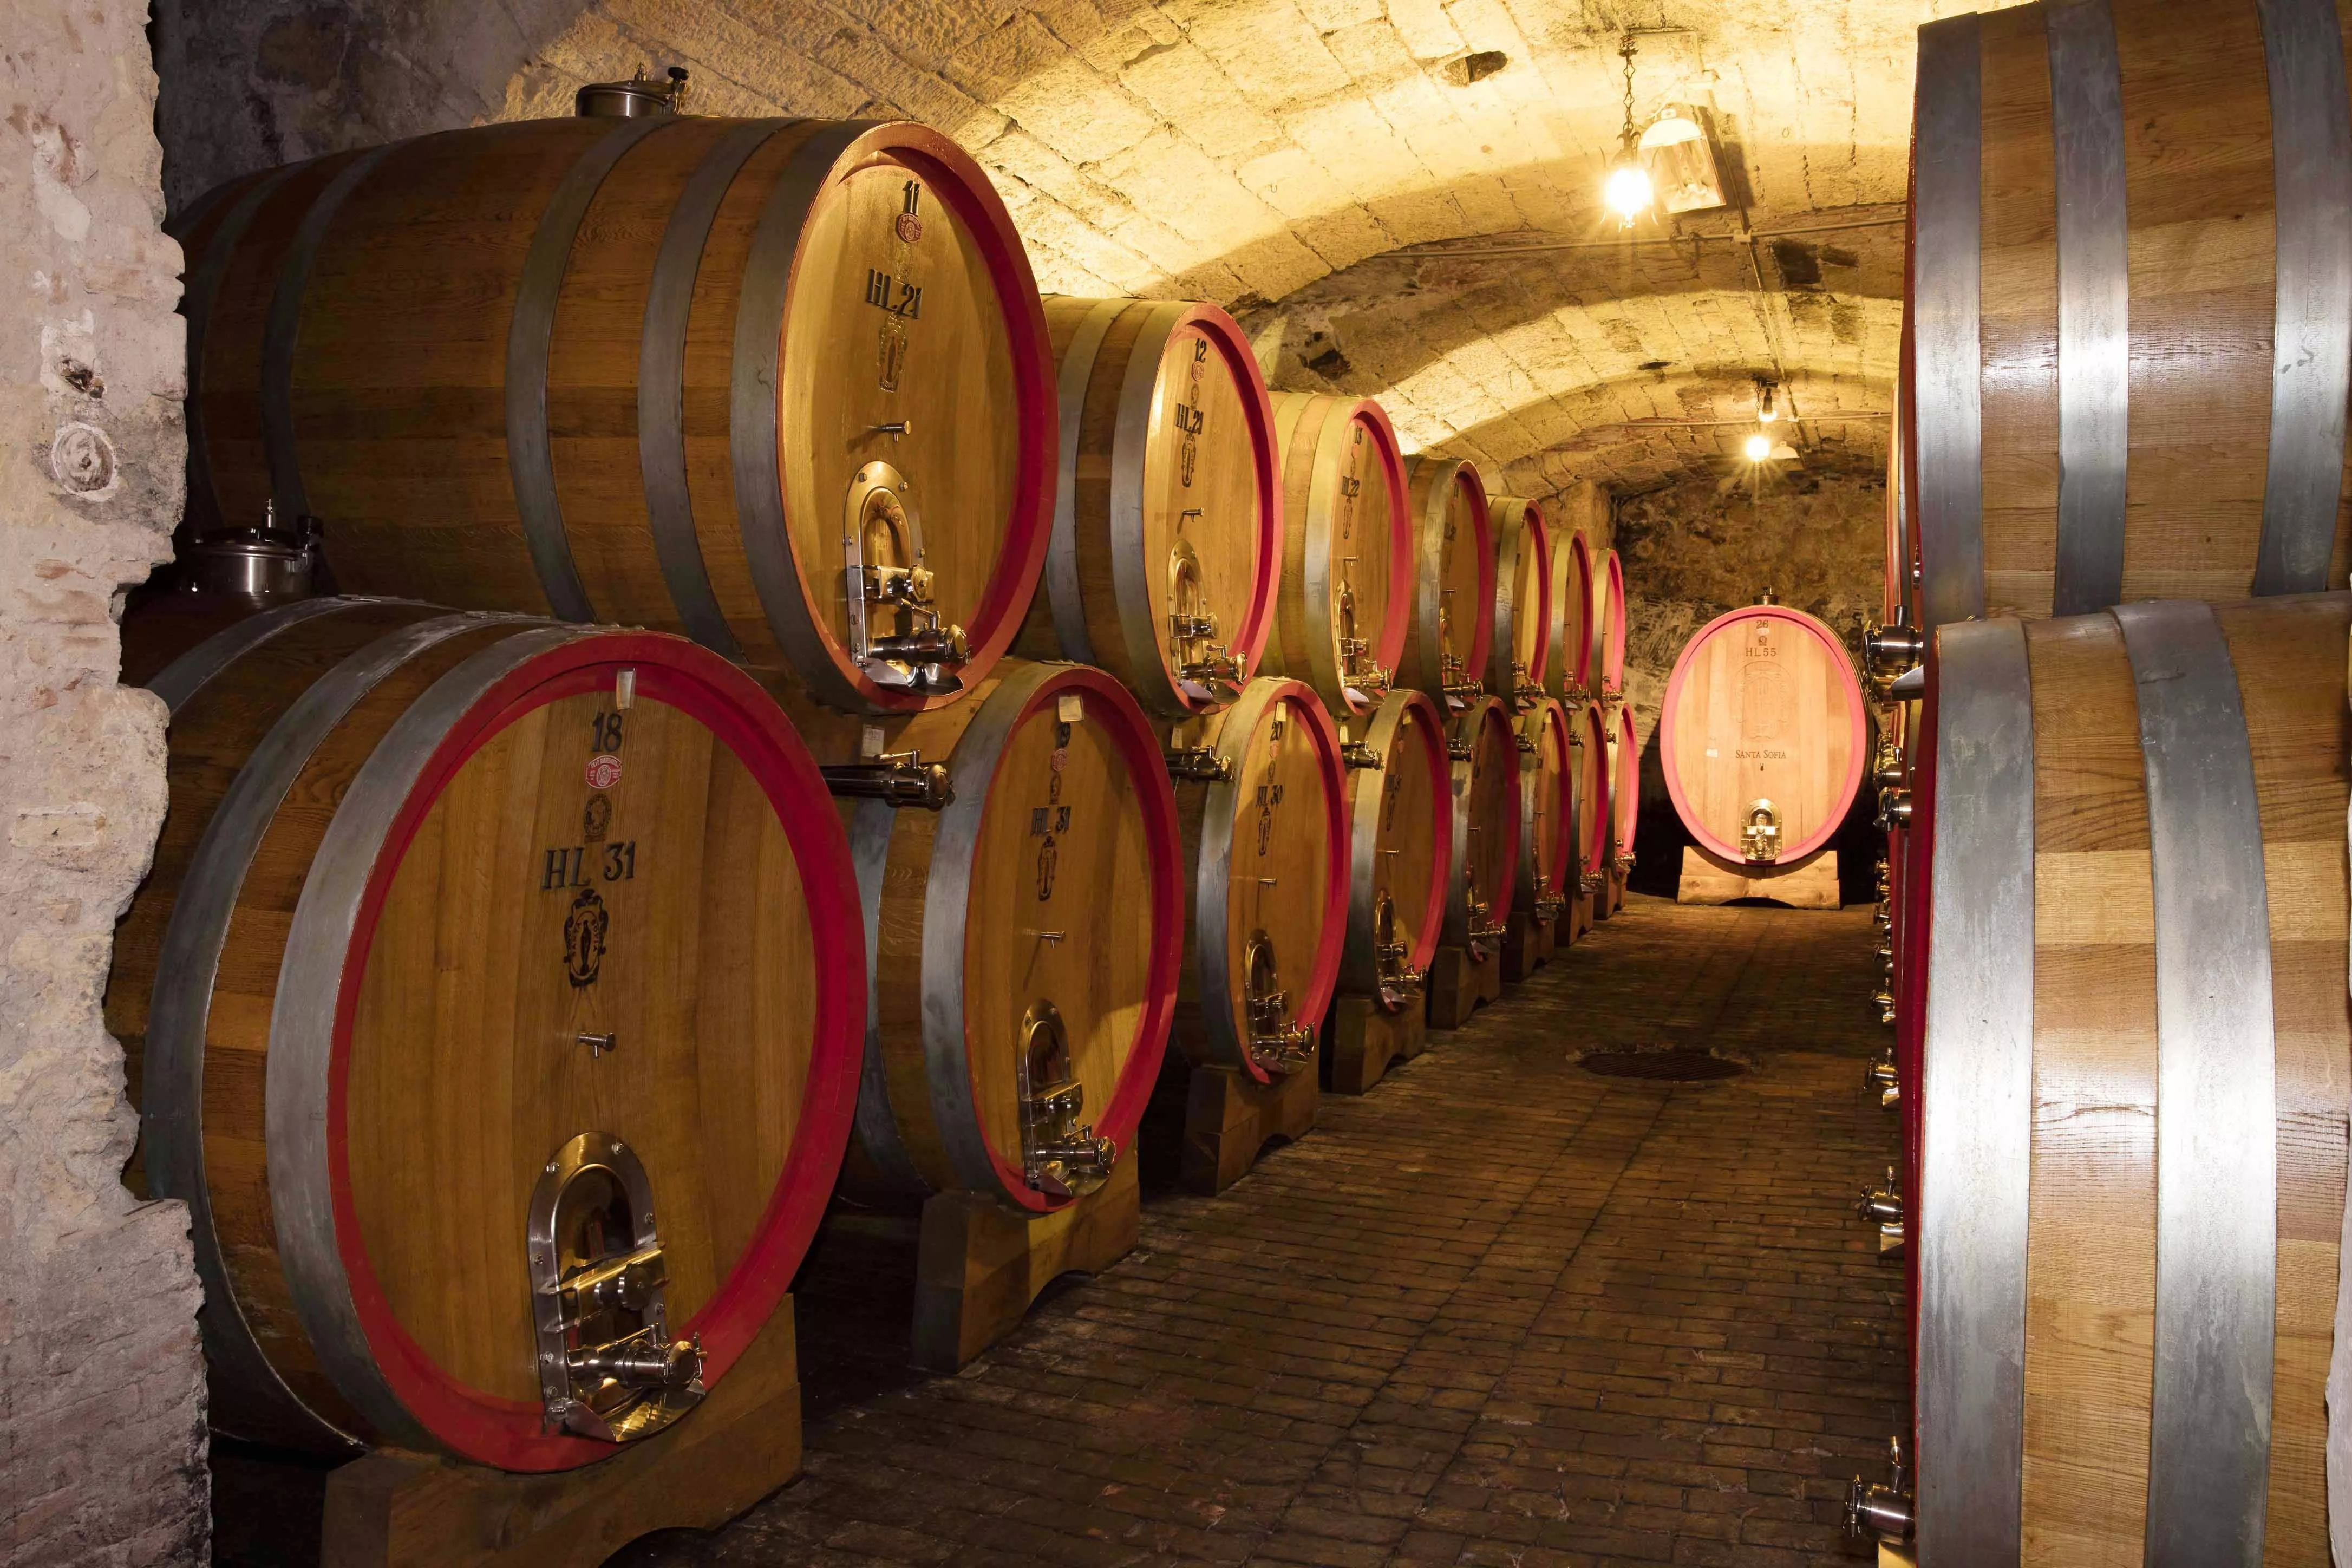 Winery De Angelis in Italy, Europe | Wineries - Rated 0.9